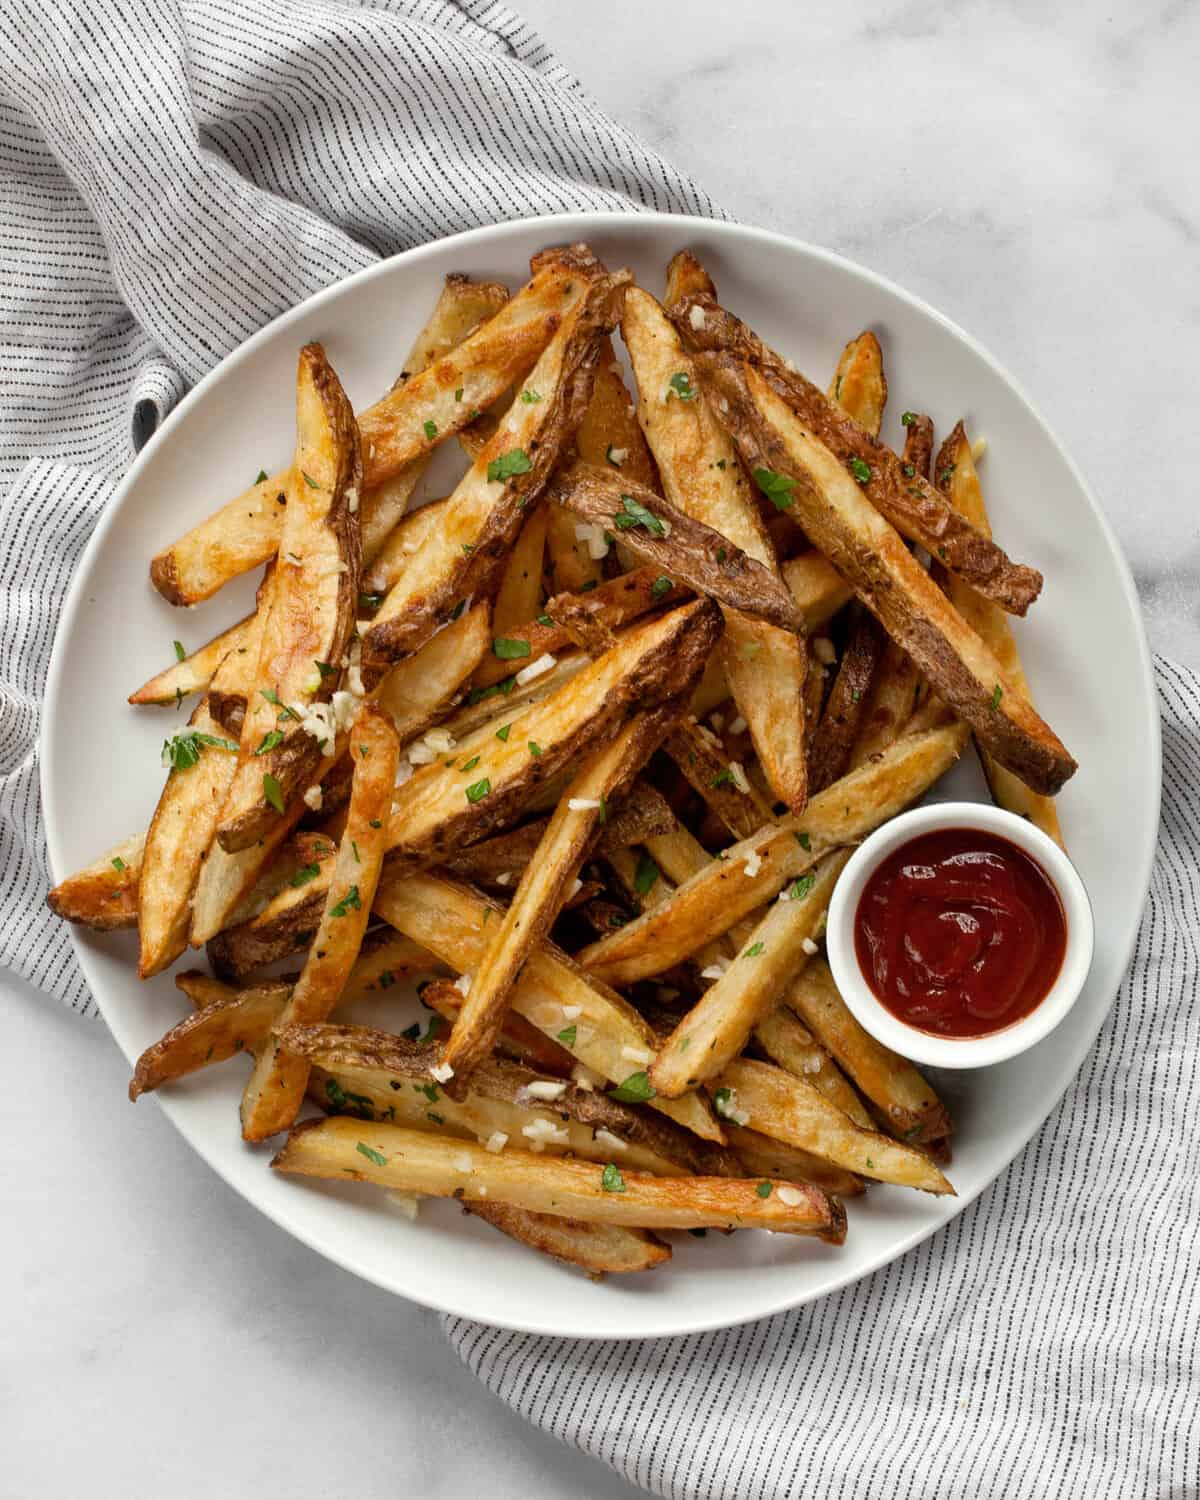 Oven-baked french fries on a plate with ketchup.